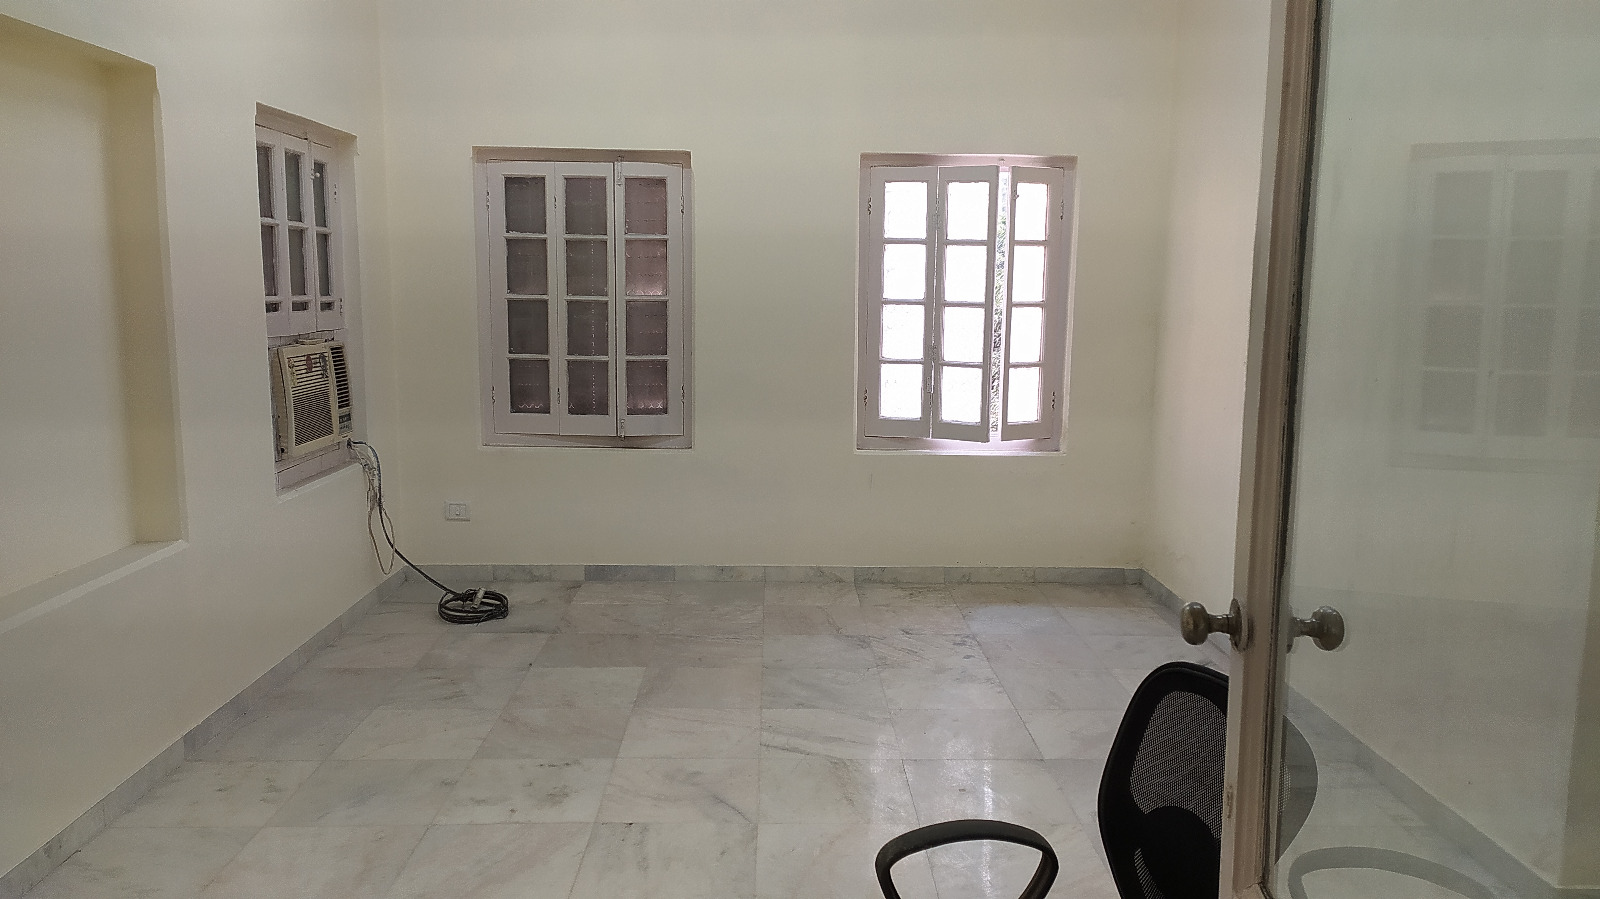 1300 Sq Feet Office Space for Rent Only in Ballygunge